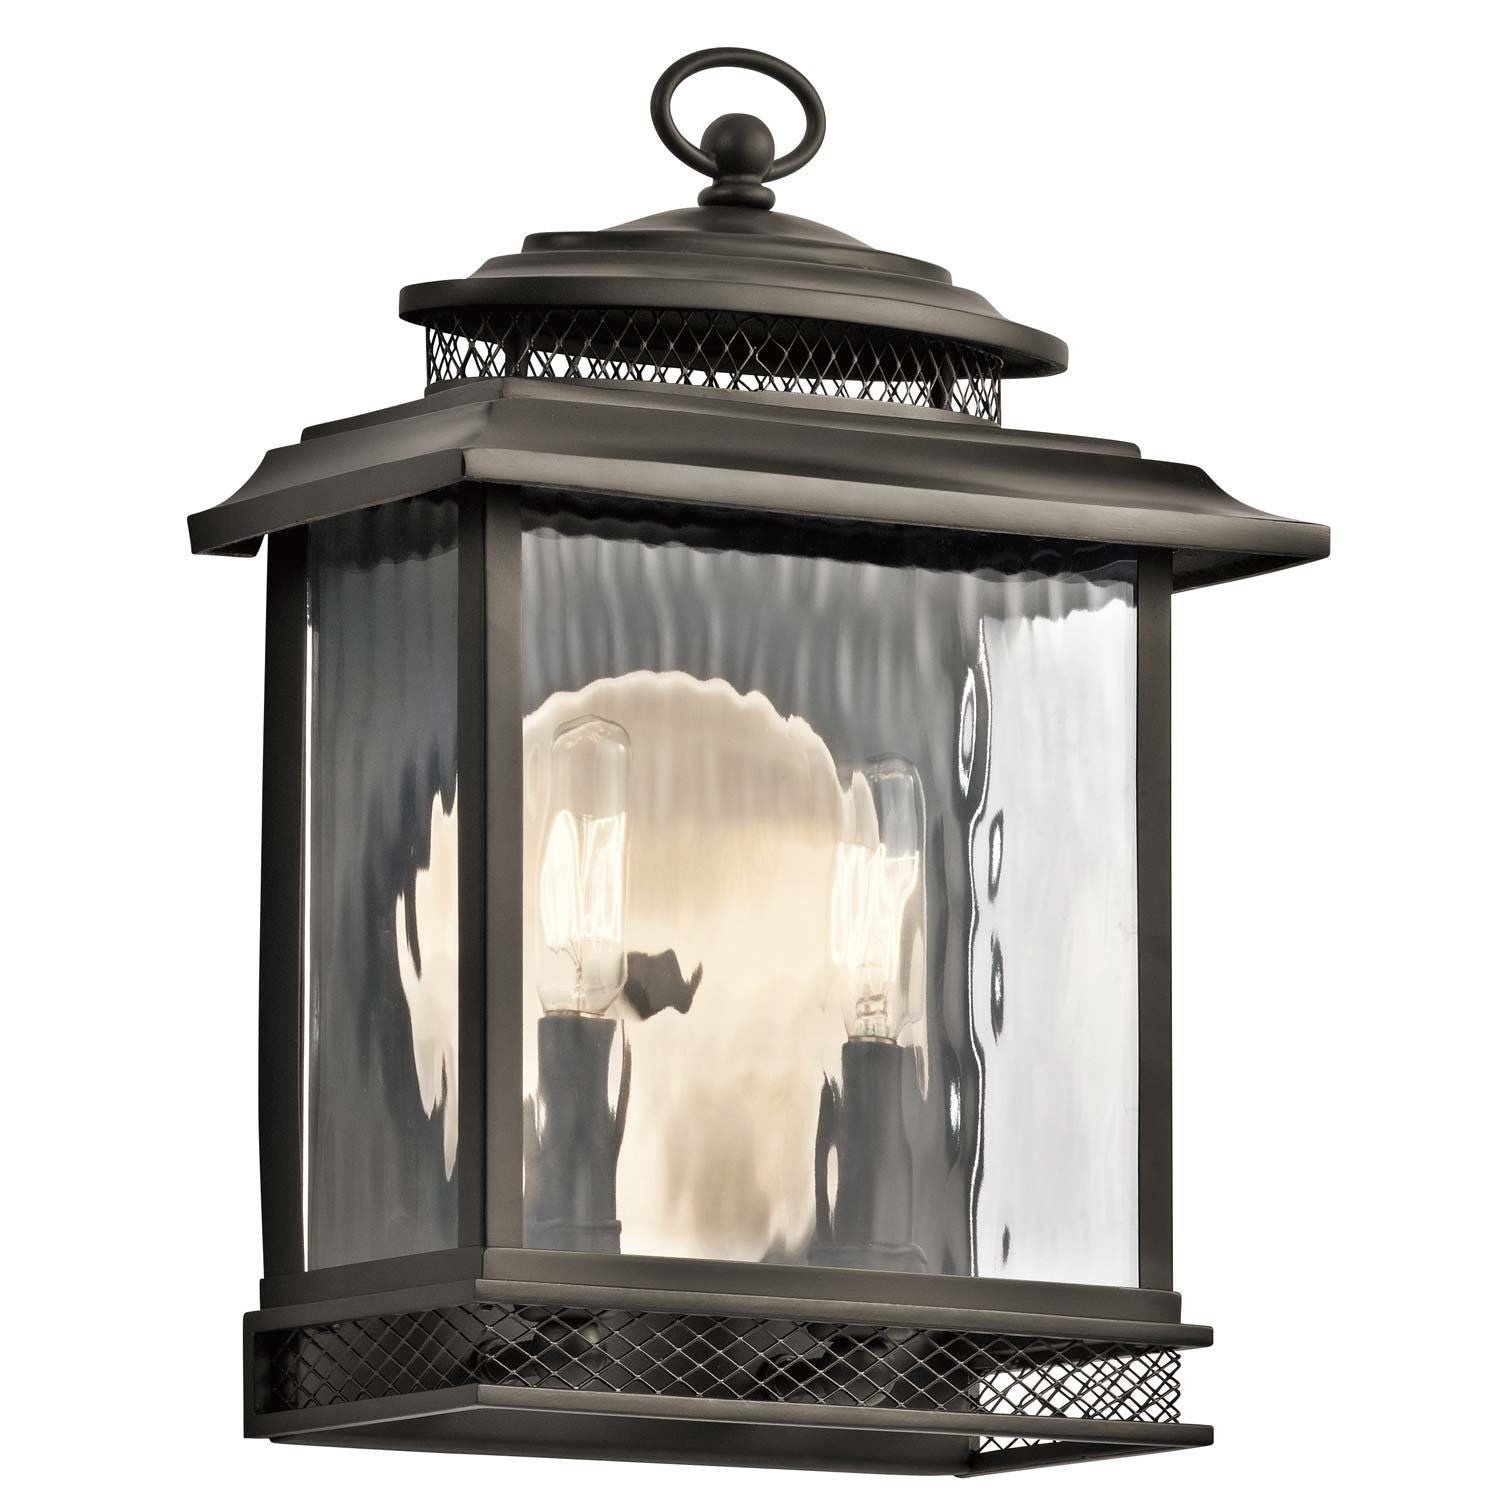 Kichler Lighting 49541 OZ Pettiford Collection Two Light Exterior Outdoor Wall Lantern in Olde Bronze Finish